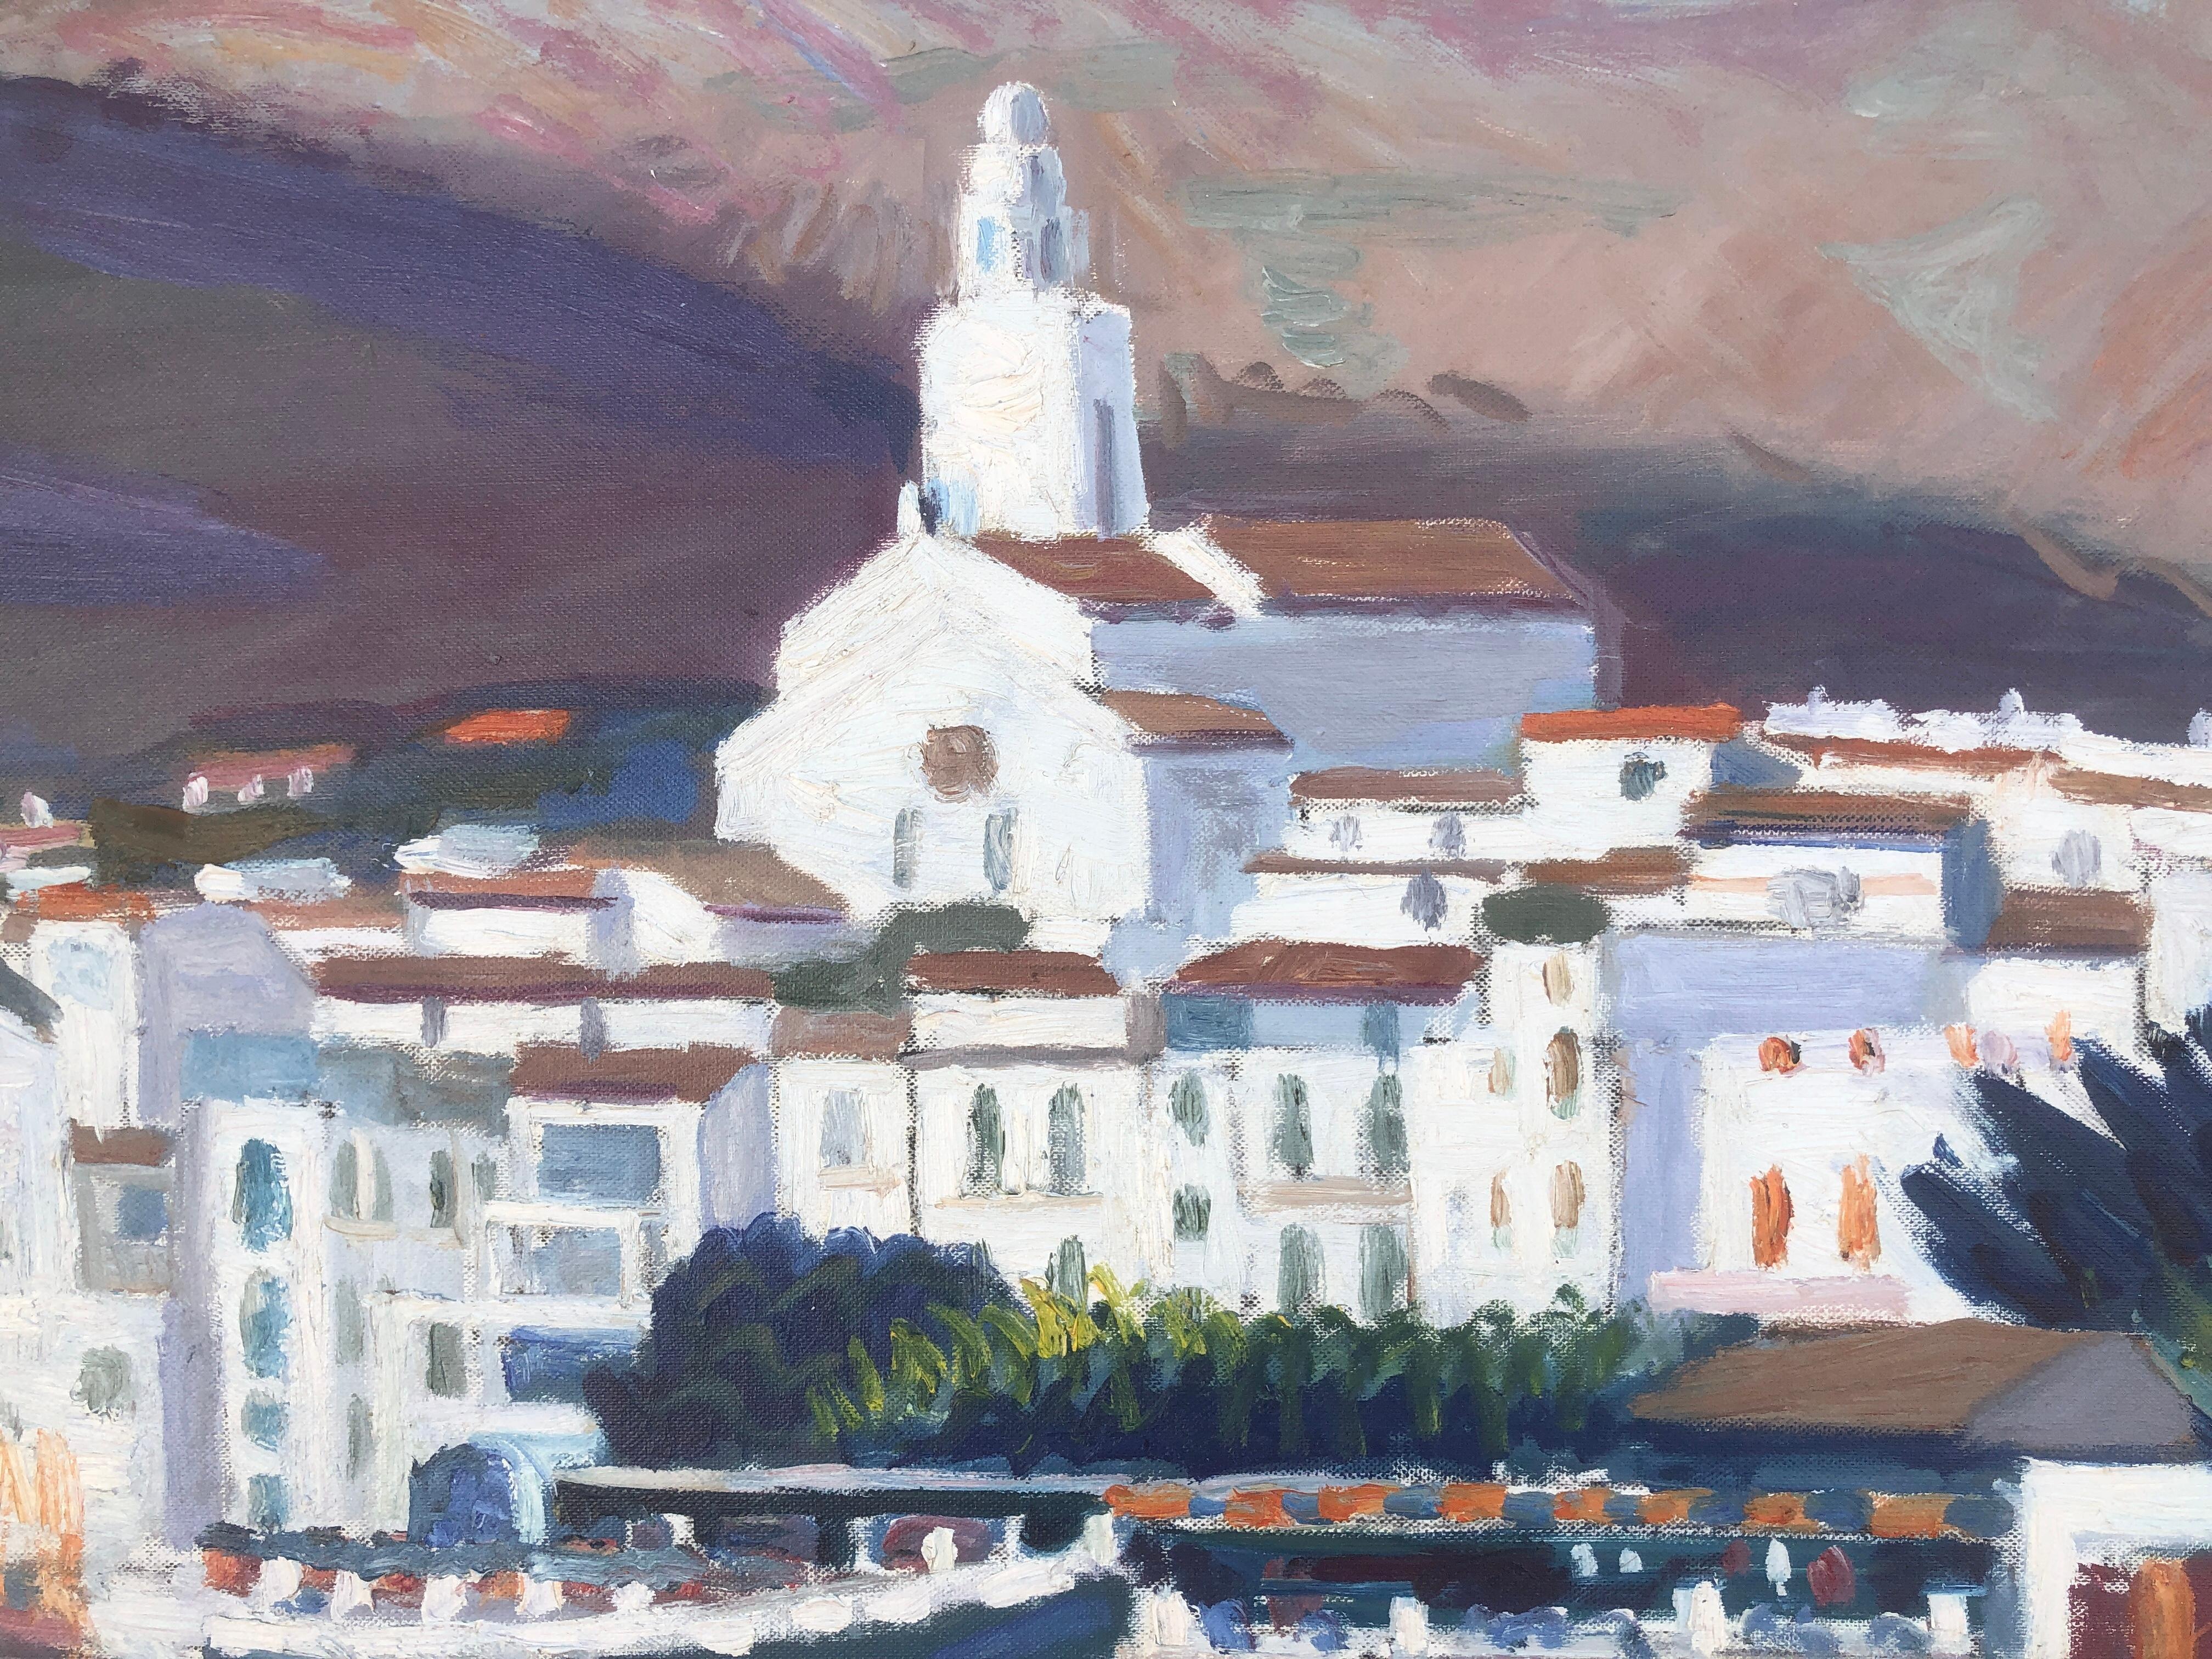 Jordi Curós Ventura (1930-2007) - Cadaques - Oil on canvas
Oil measures 60x73 cm.
Frameless..

Jordi Curós Ventura (Olot, Girona, March 4, 1930) is a Catalan painter.

He trained at the Olot School of Arts and Crafts, a center of great artistic